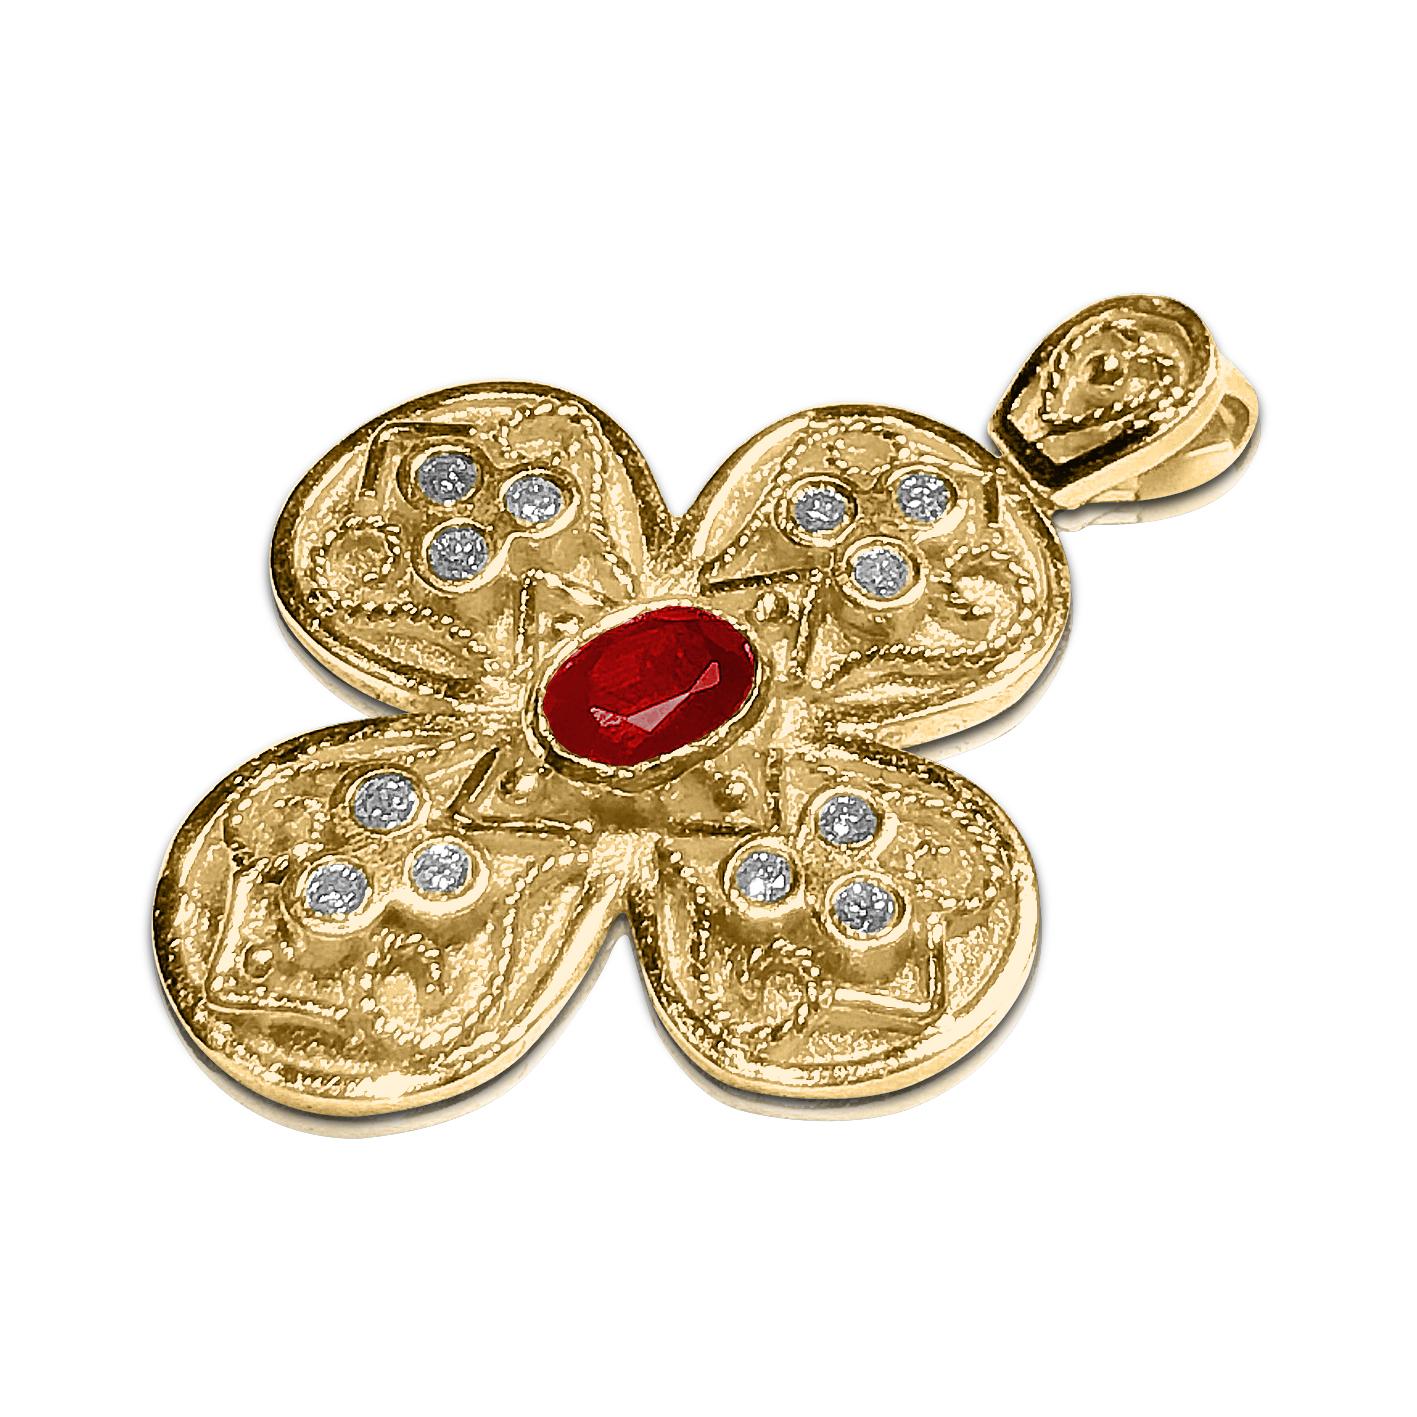 S.Georgios Byzantine Style Cross is handmade from solid 18 Karat Yellow Gold and features a Ruby oval shape total weight of 0,70 Carat and Diamonds total weight of 0,24 Carat. This art piece is made as an inspiration from the Byzantine Museum in